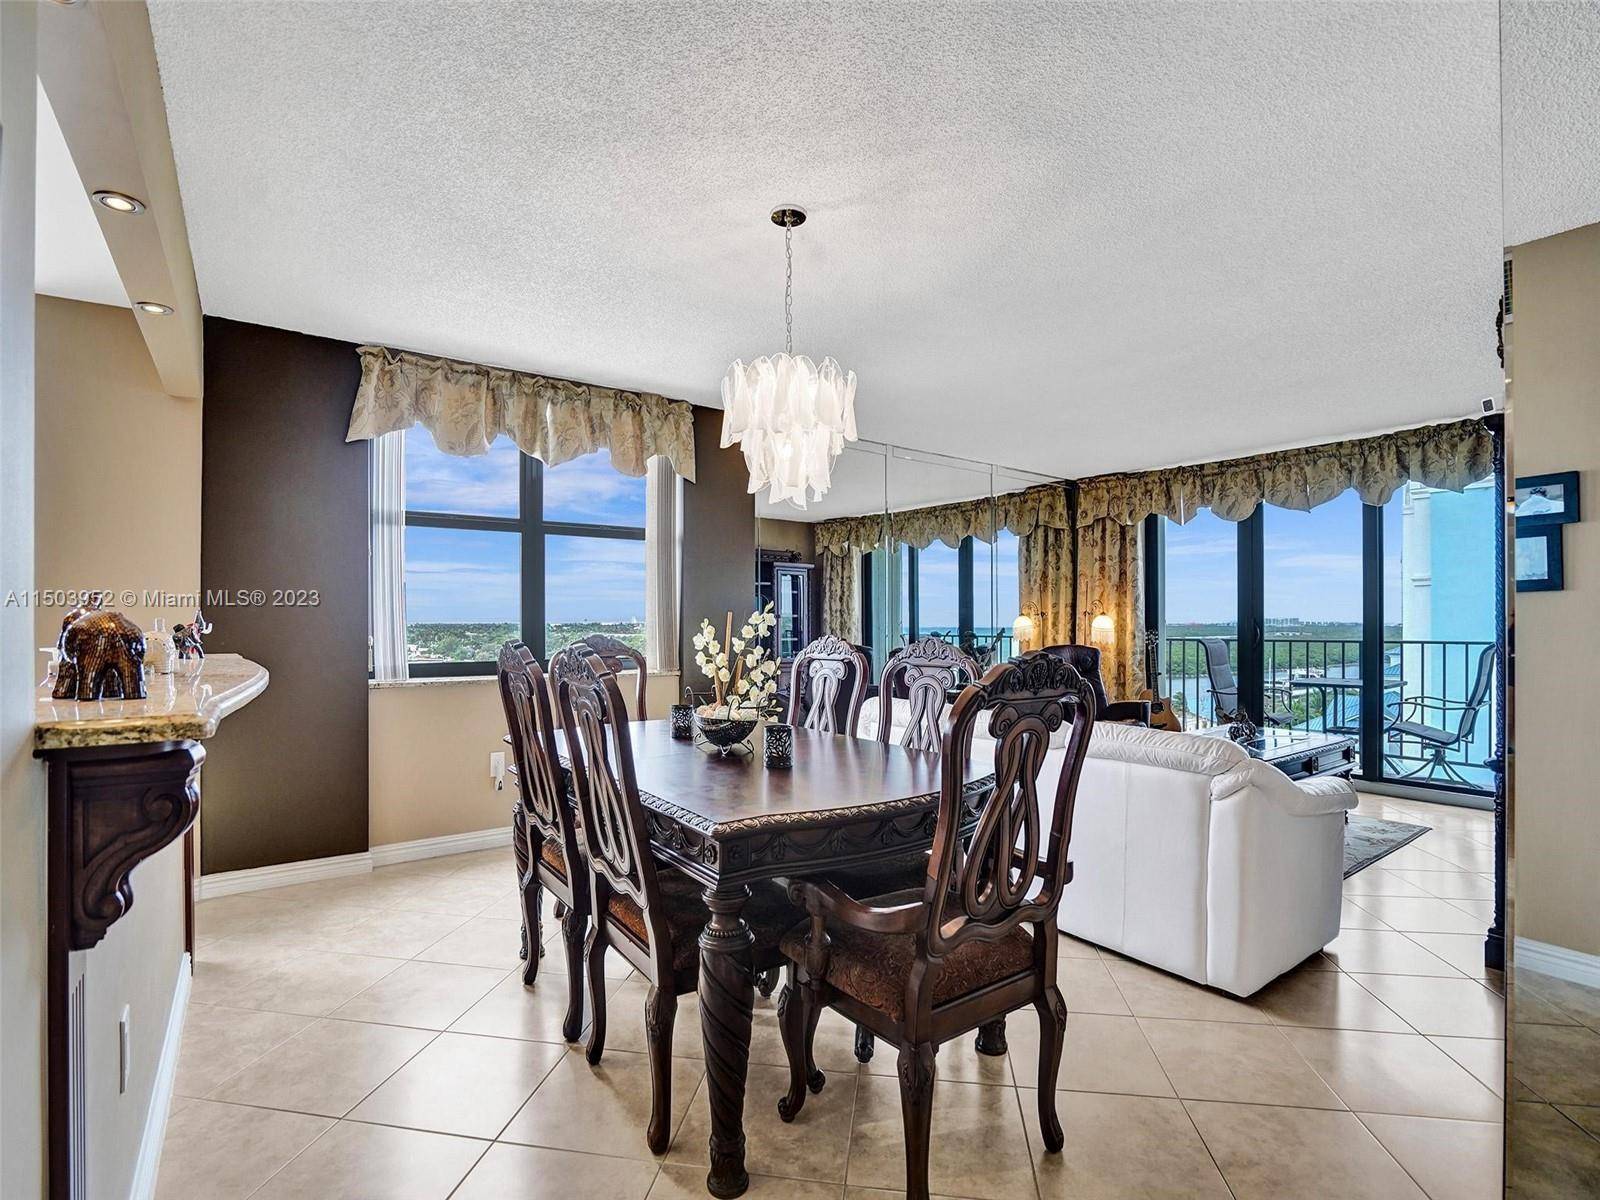 MOVE IN READY Turnkey Condo 2 bed, 2 bath in the CRYSTAL Tower condo on Hollywood Beach.